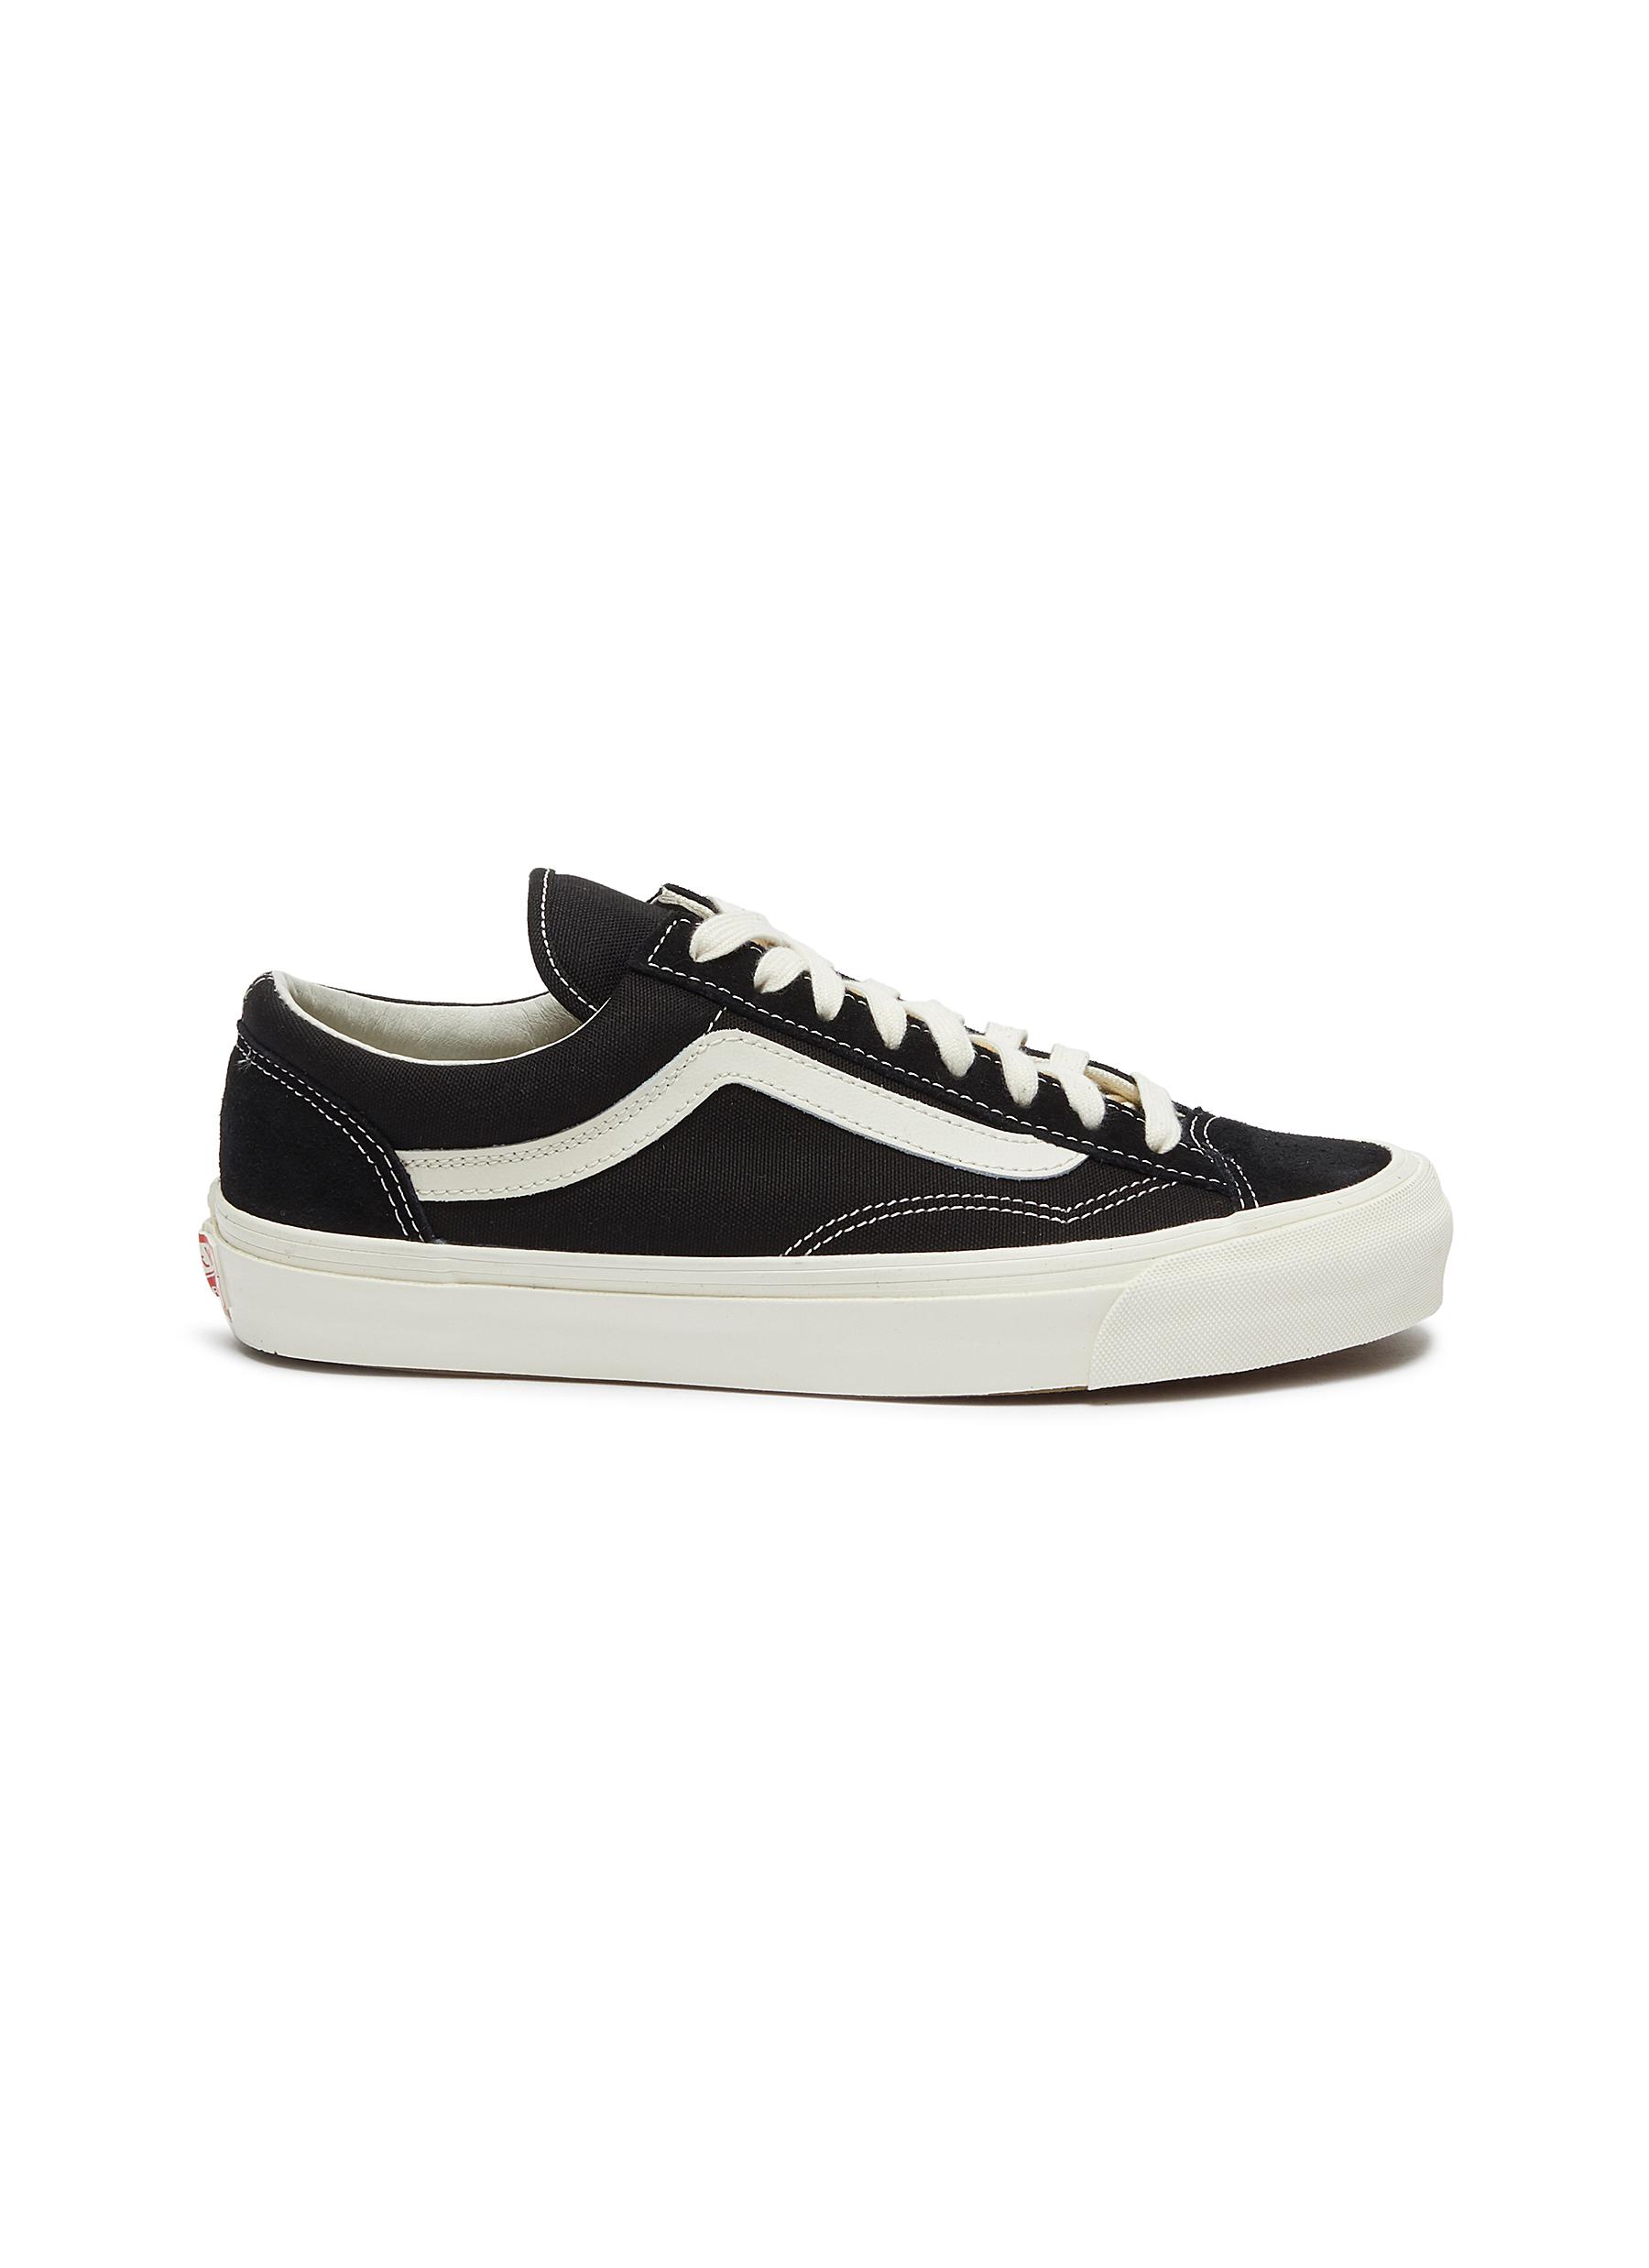 OG Style 36 LX canvas skate sneakers by Vans